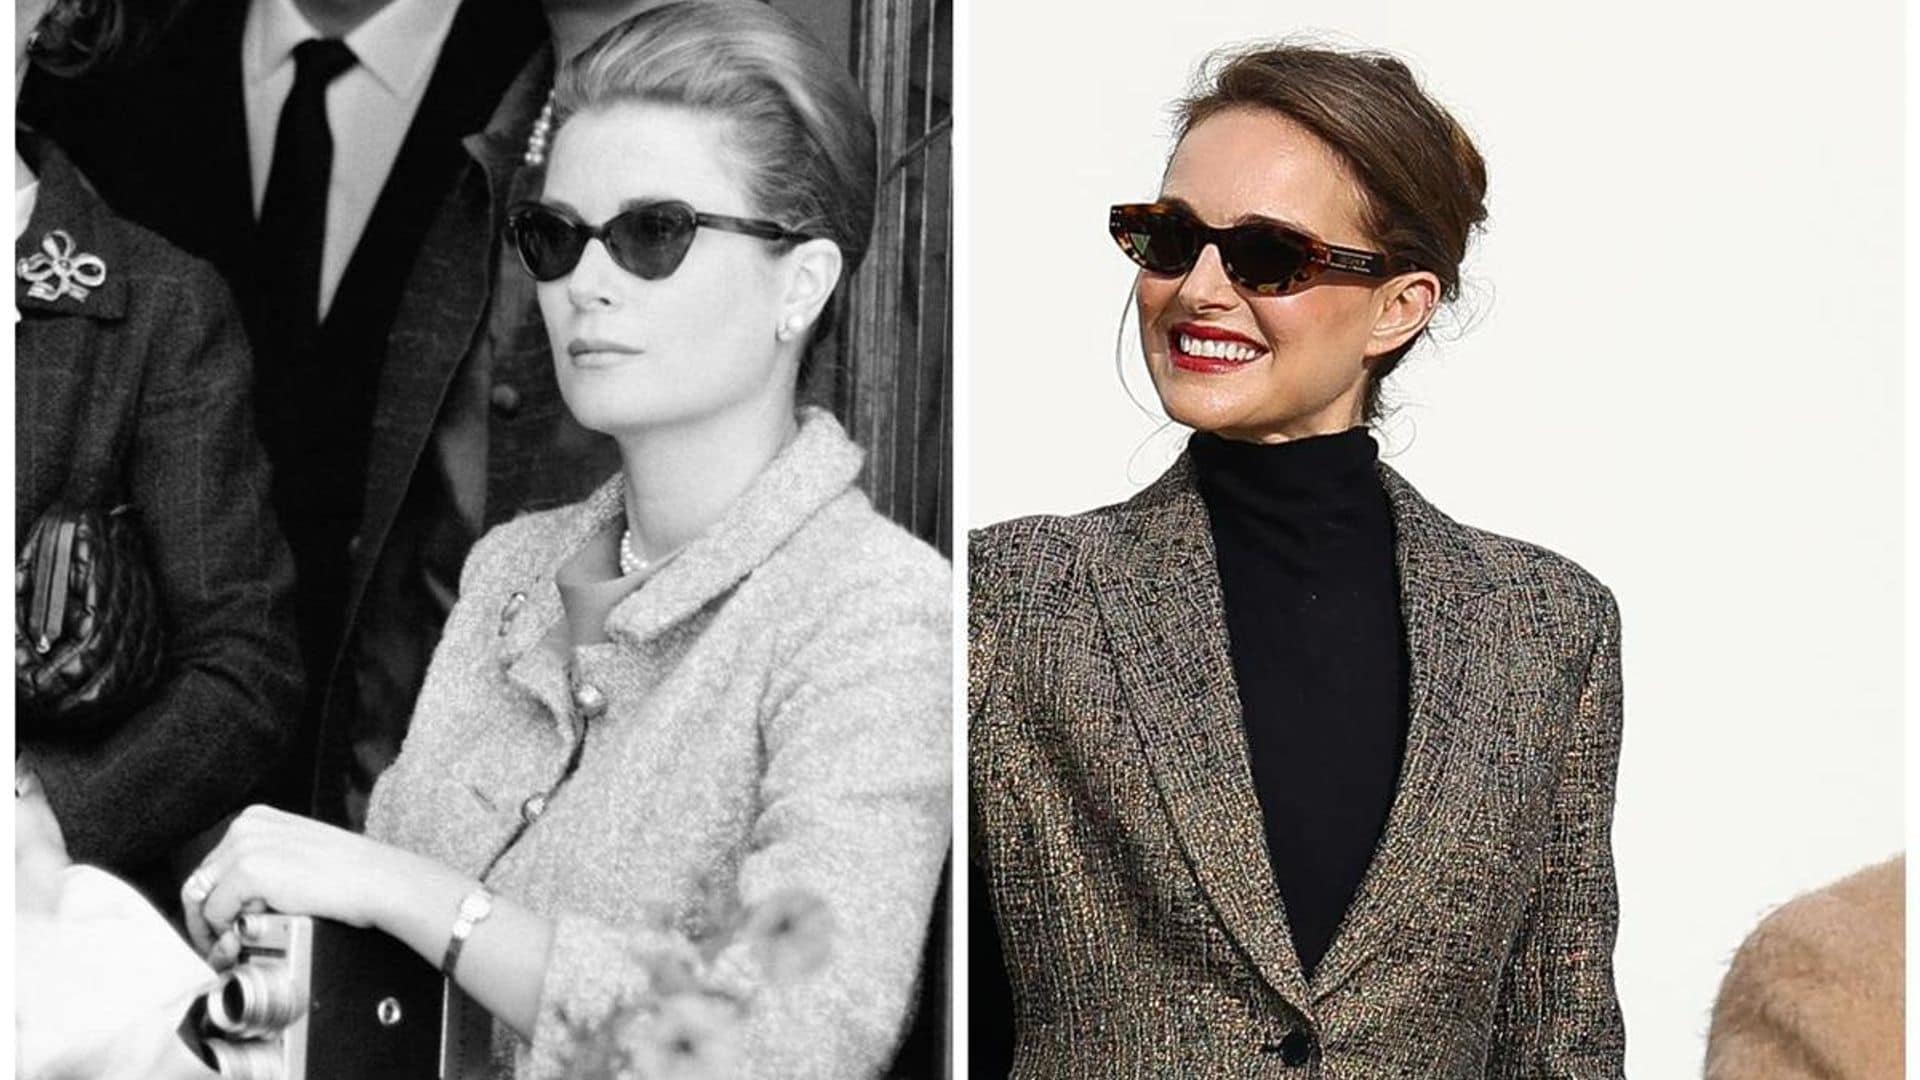 Natalie Portman channeled Grace Kelly in head-to-toe Dior during latest outing in Paris